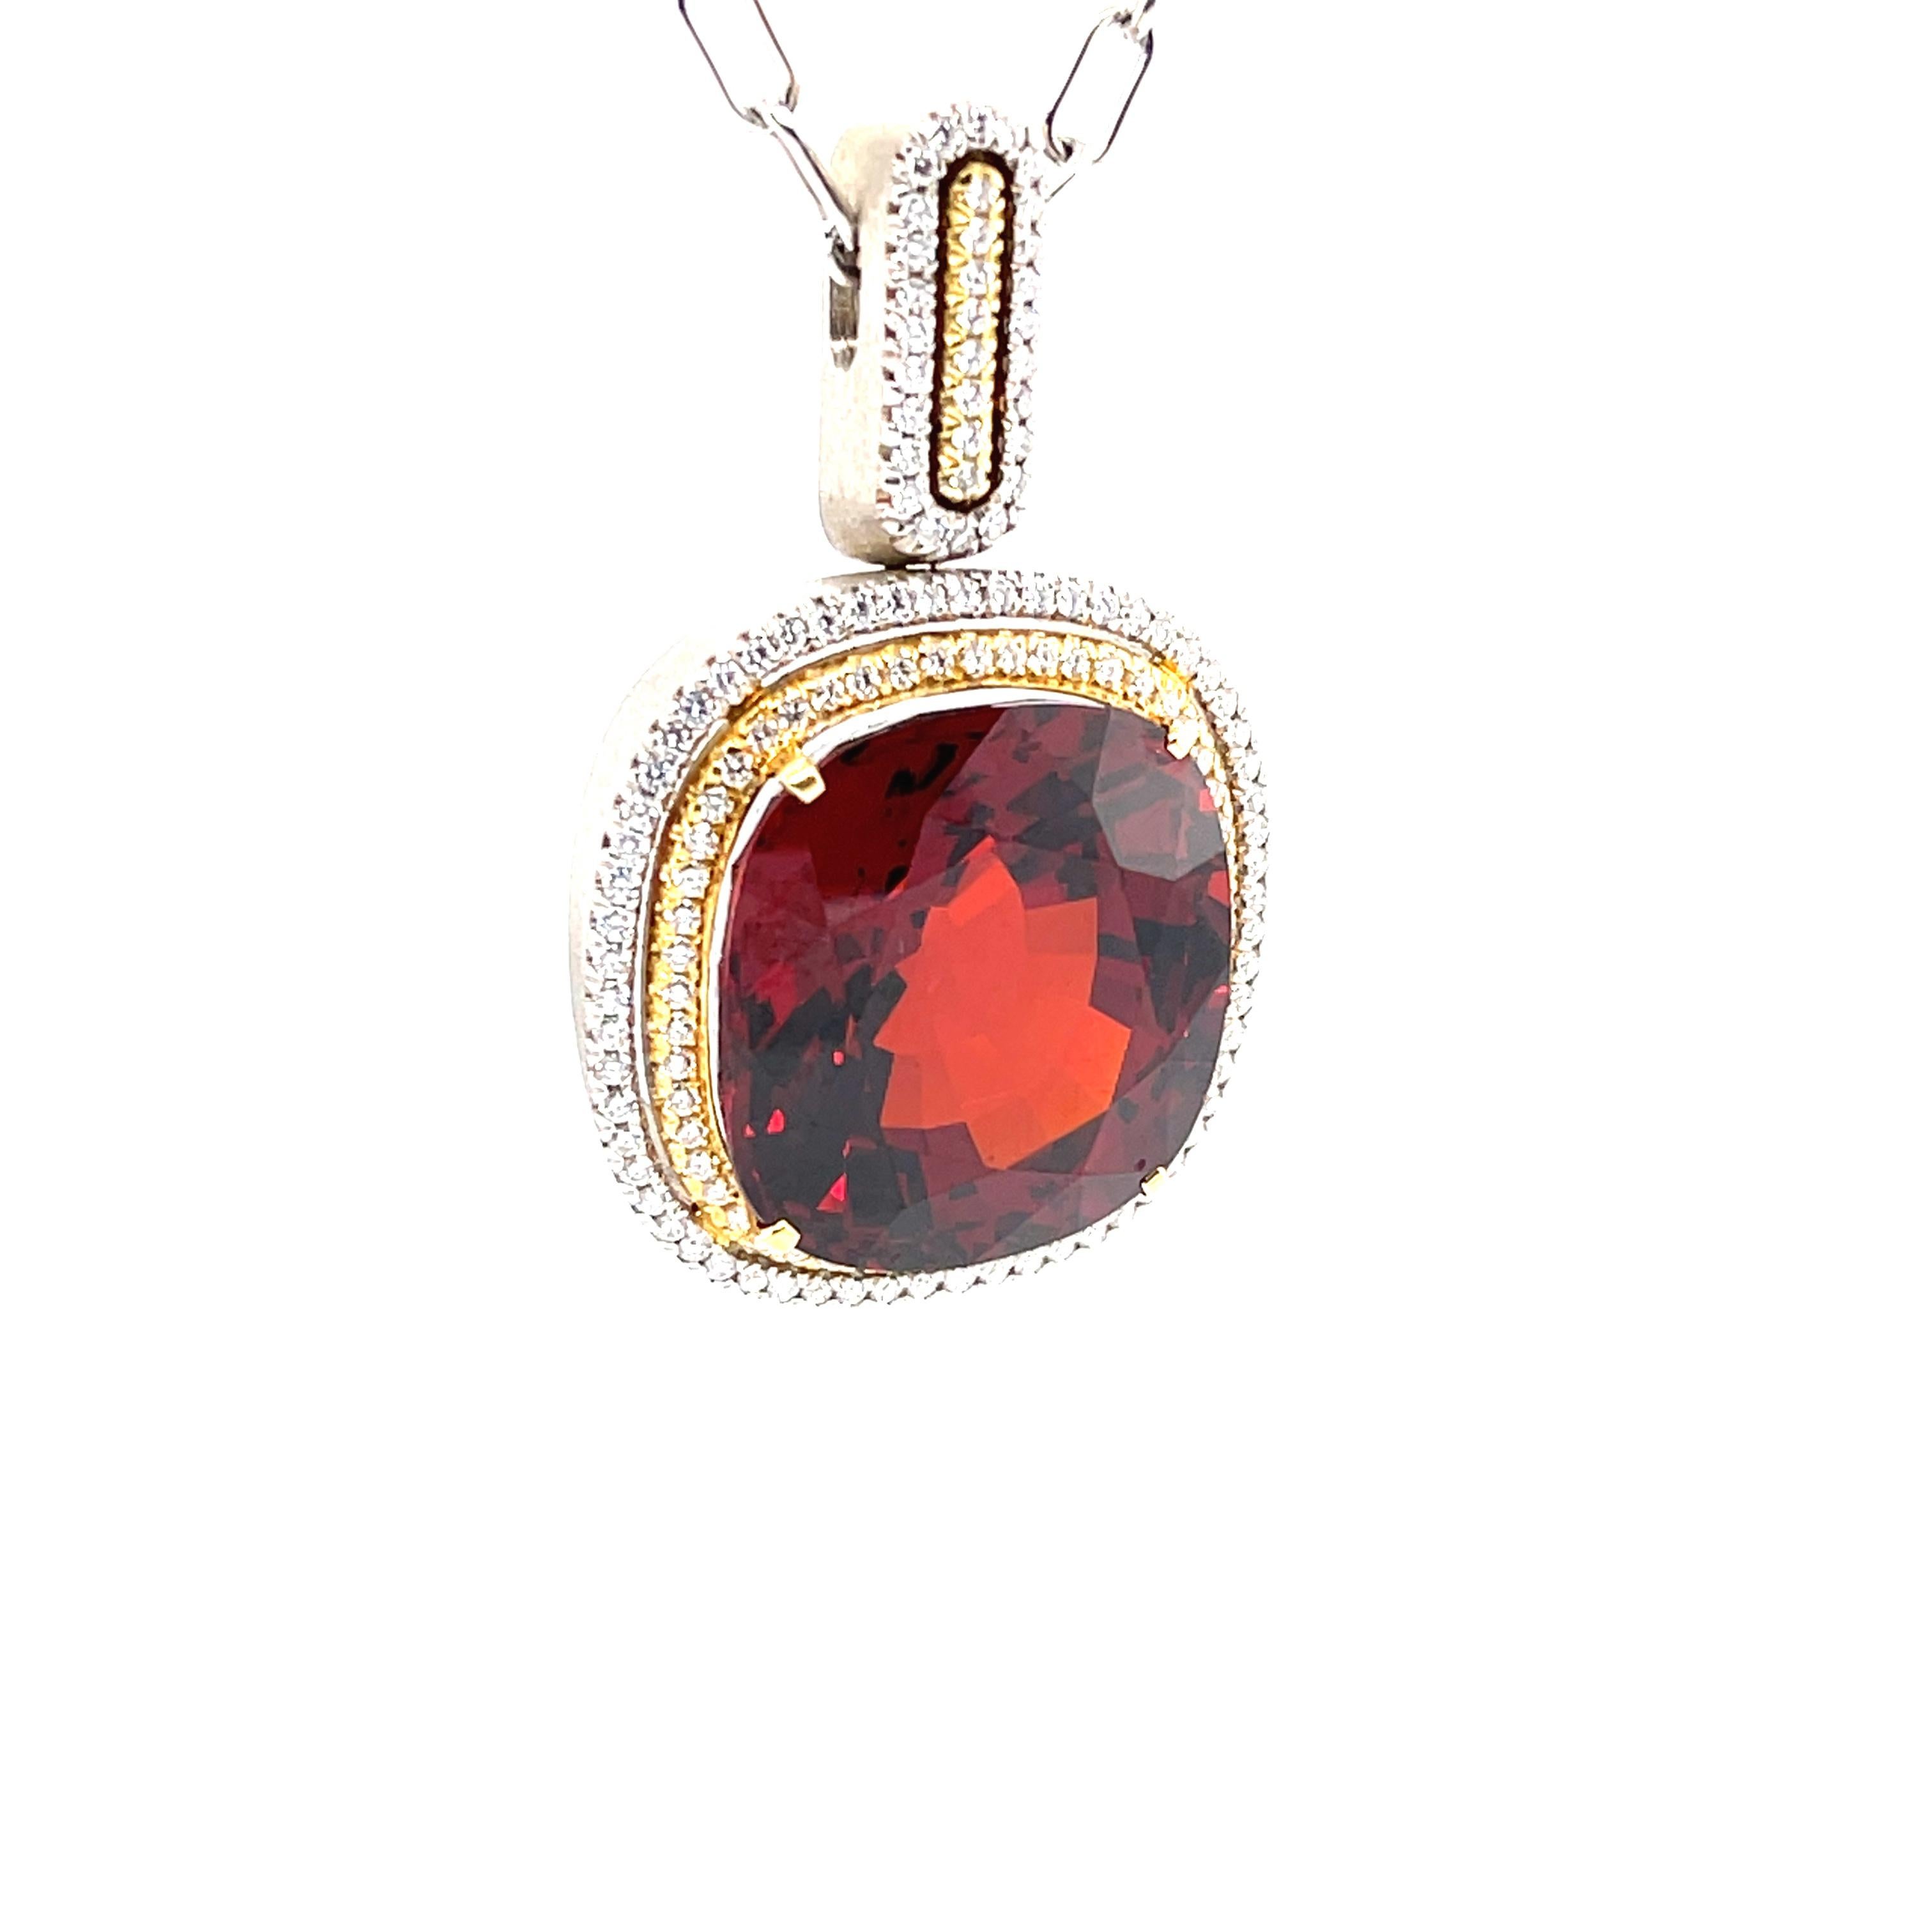 50.93 Carat Hessonite Garnet and Diamond Halo Necklace in Yellow and White Gold 1